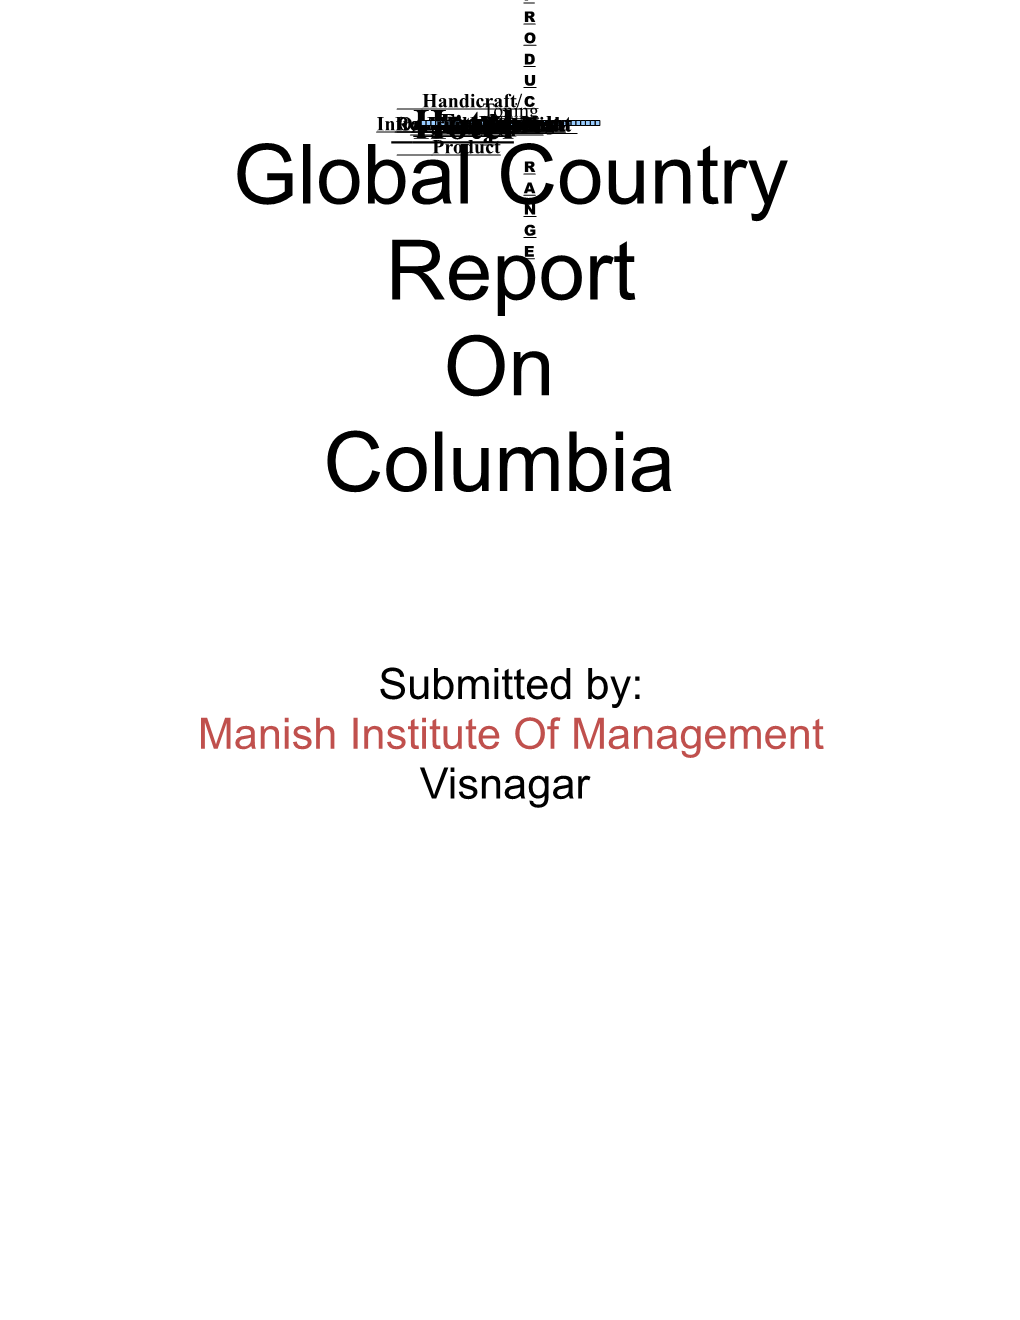 Global Country Report on Columbia